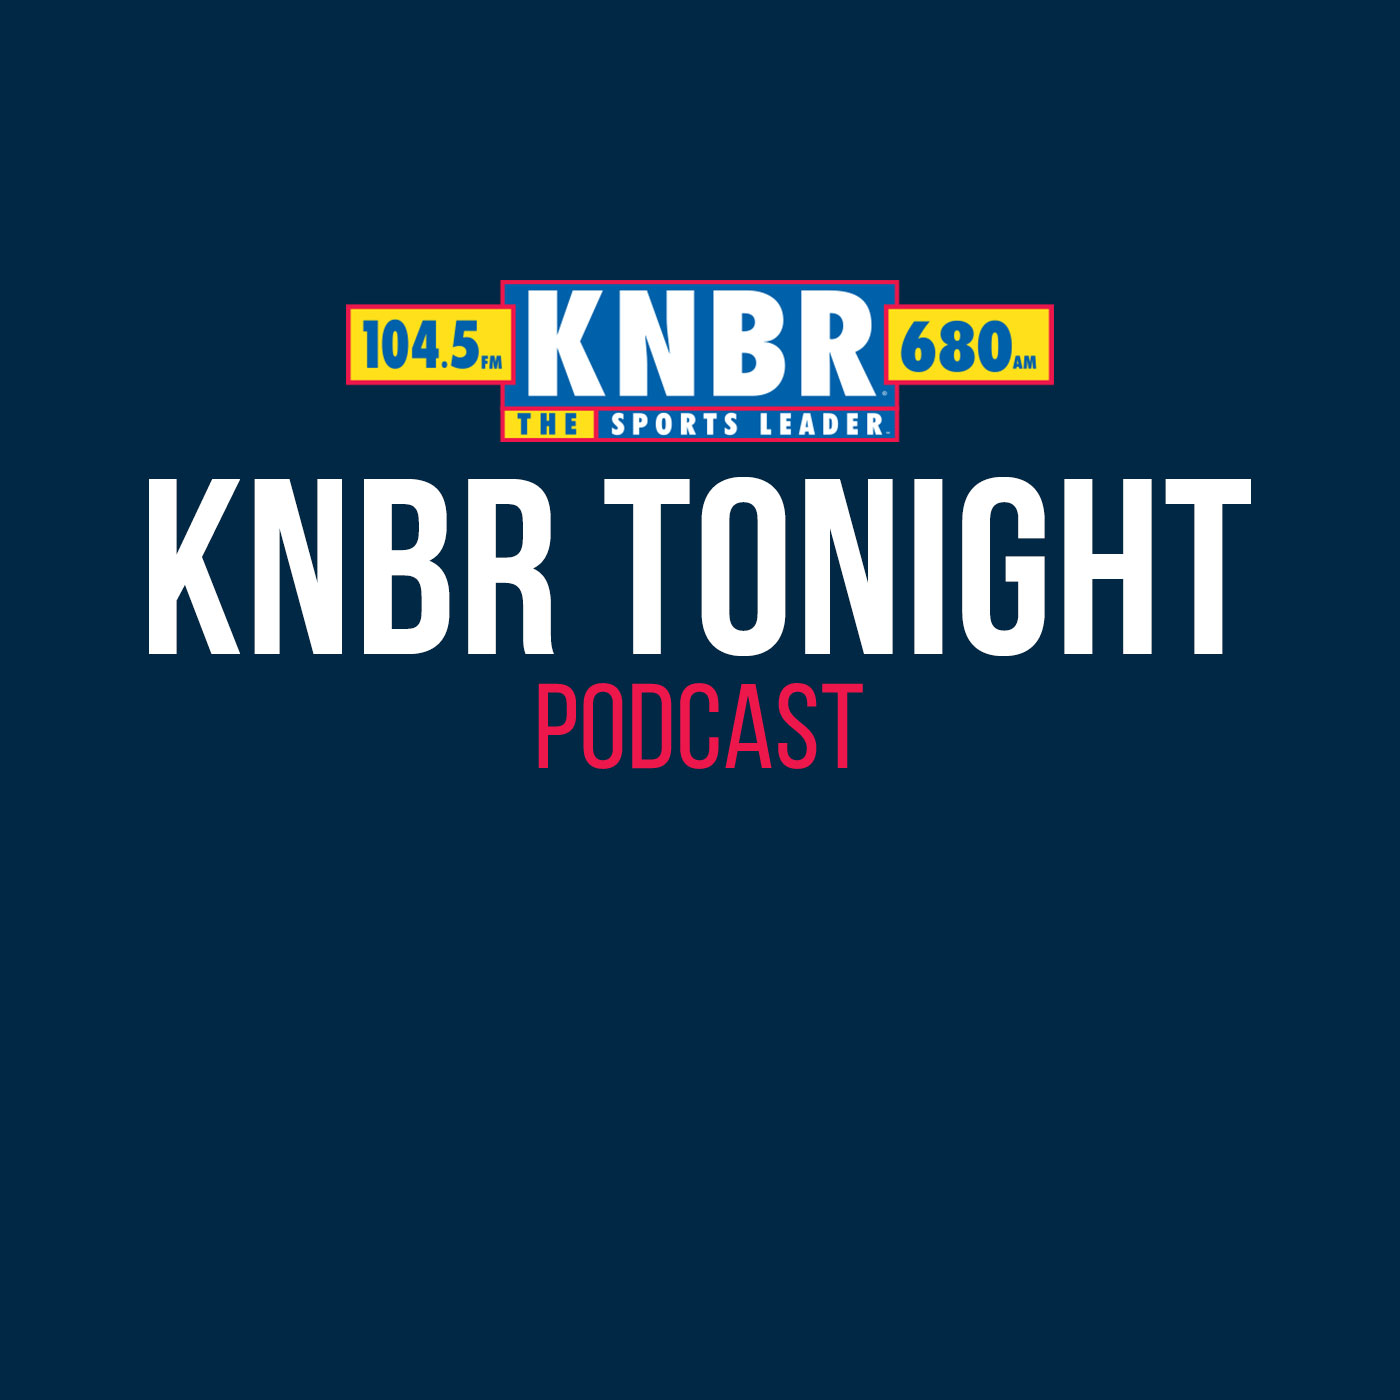 2-11 Akash joins KNBR Tonight w/ Dieter to talk about why he's picking the Rams to beat the Bengals in Super Bowl LVI